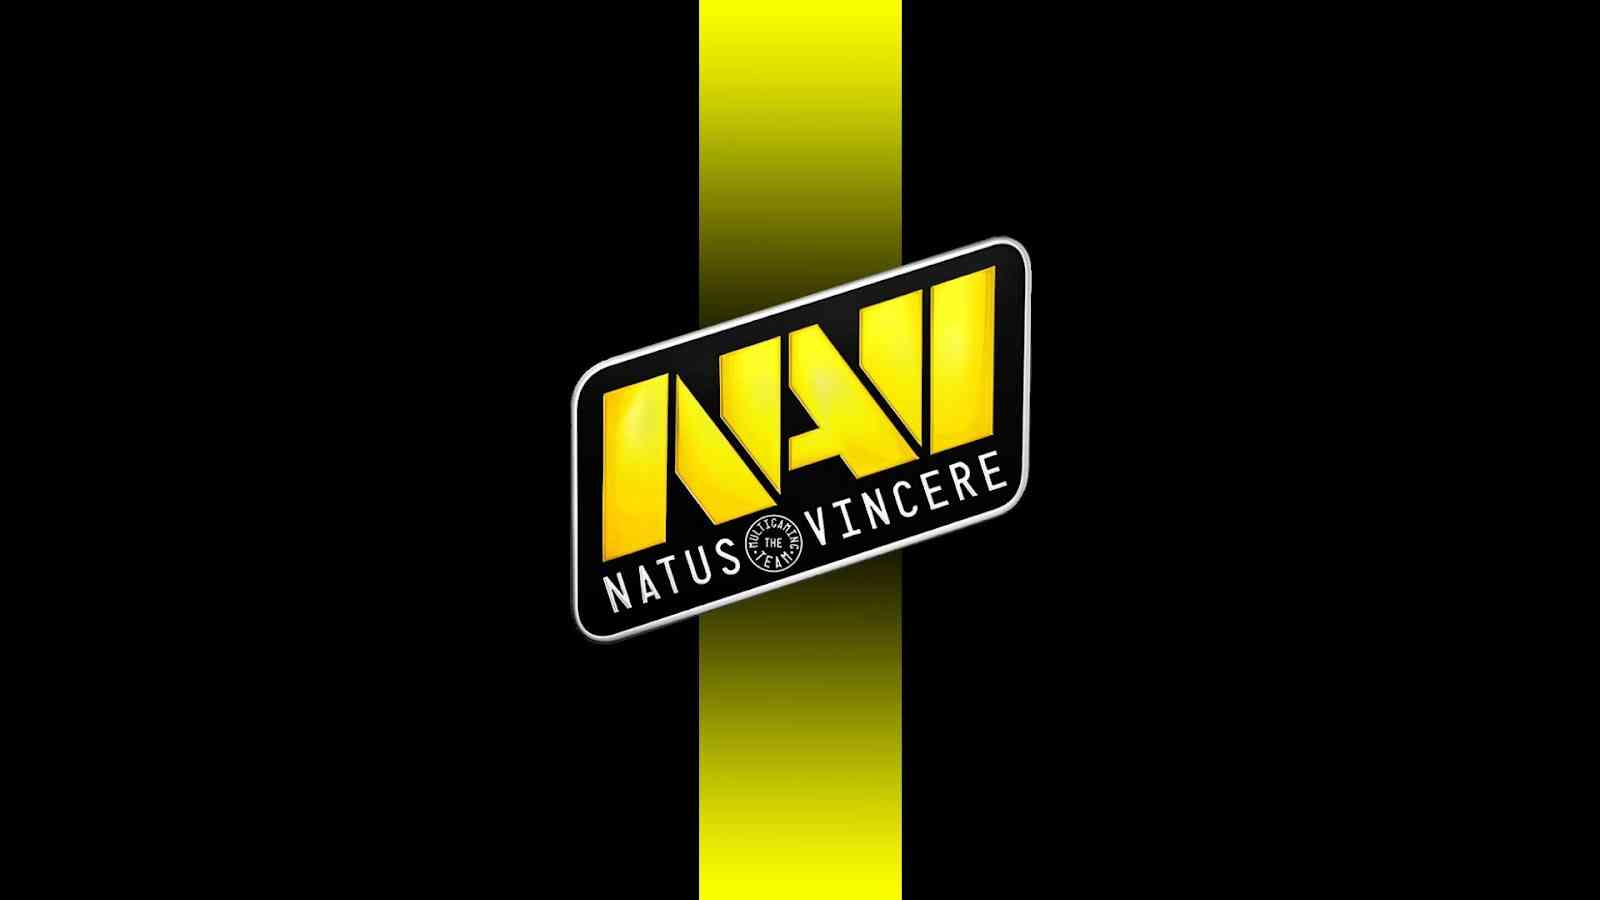 The logo for the esports organisation Natus Vincere, a stylized version of the letters "NAVI" appears in yellow & white against a black background